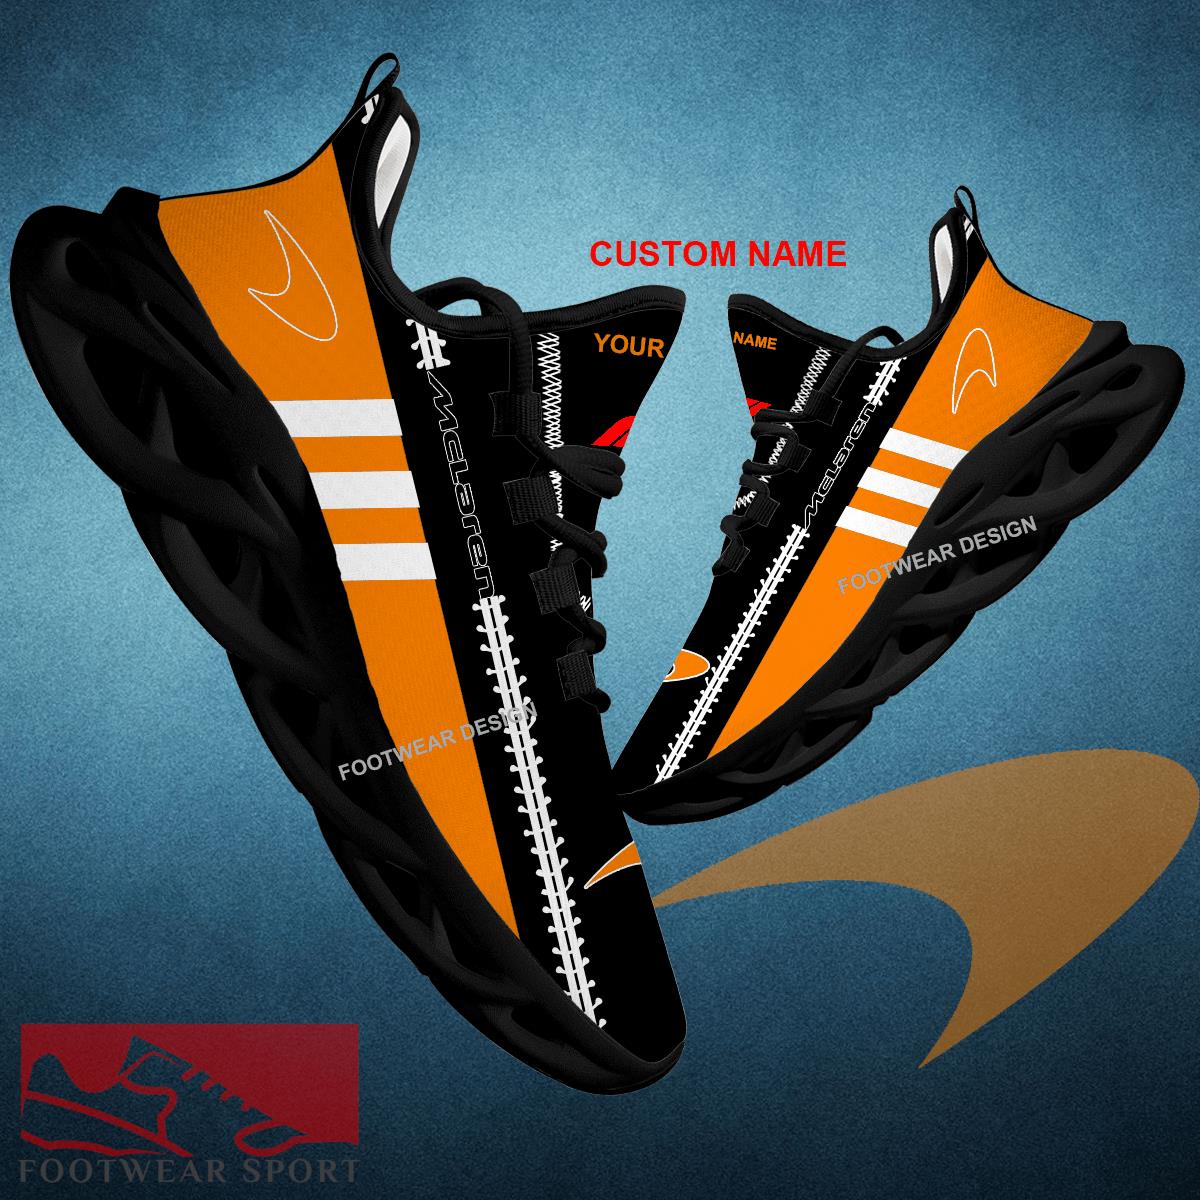 F1 Racing McLaren Formula 1 Team Chunky Shoes New Design Gift Fans Max Soul Sneakers Personalized - F1 Racing McLaren Formula 1 Team Logo New Chunky Shoes Photo 1